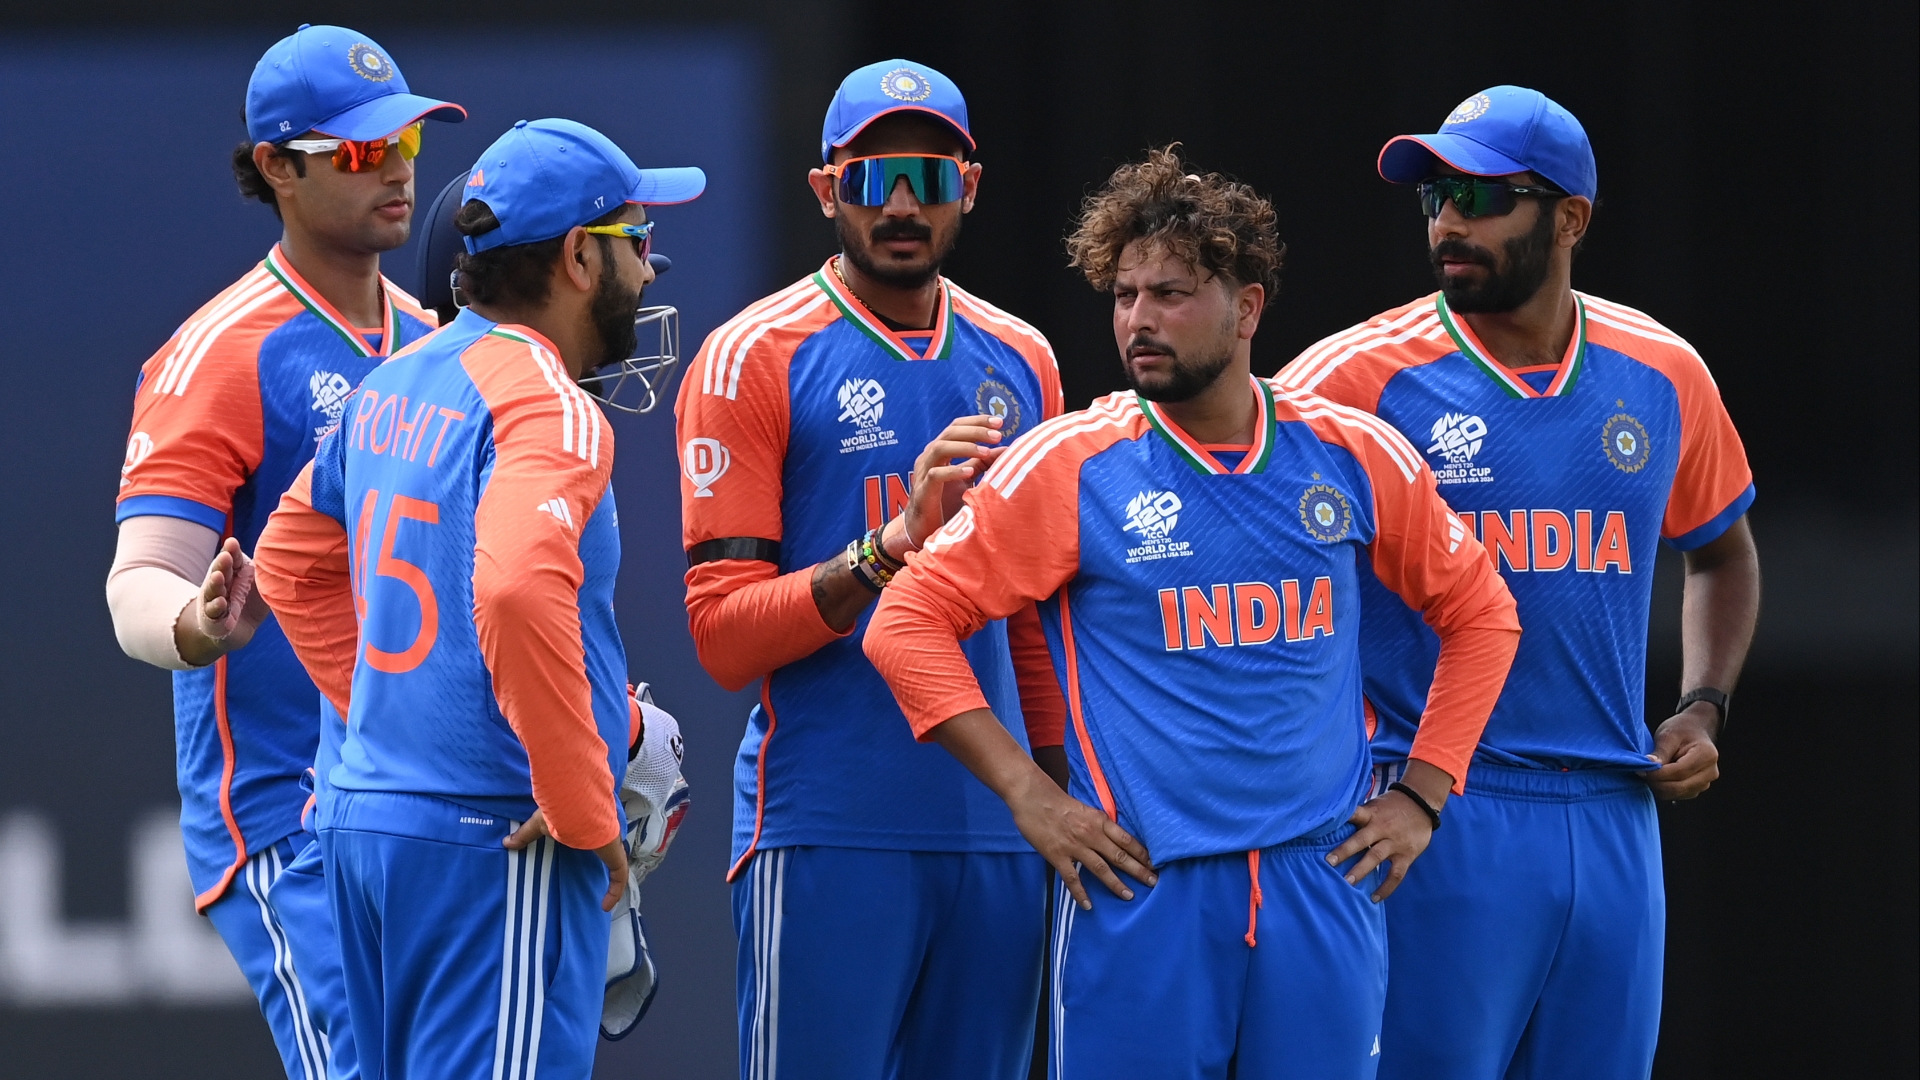 India vs Bangladesh T20 World Cup Tips, Preview & Live Stream